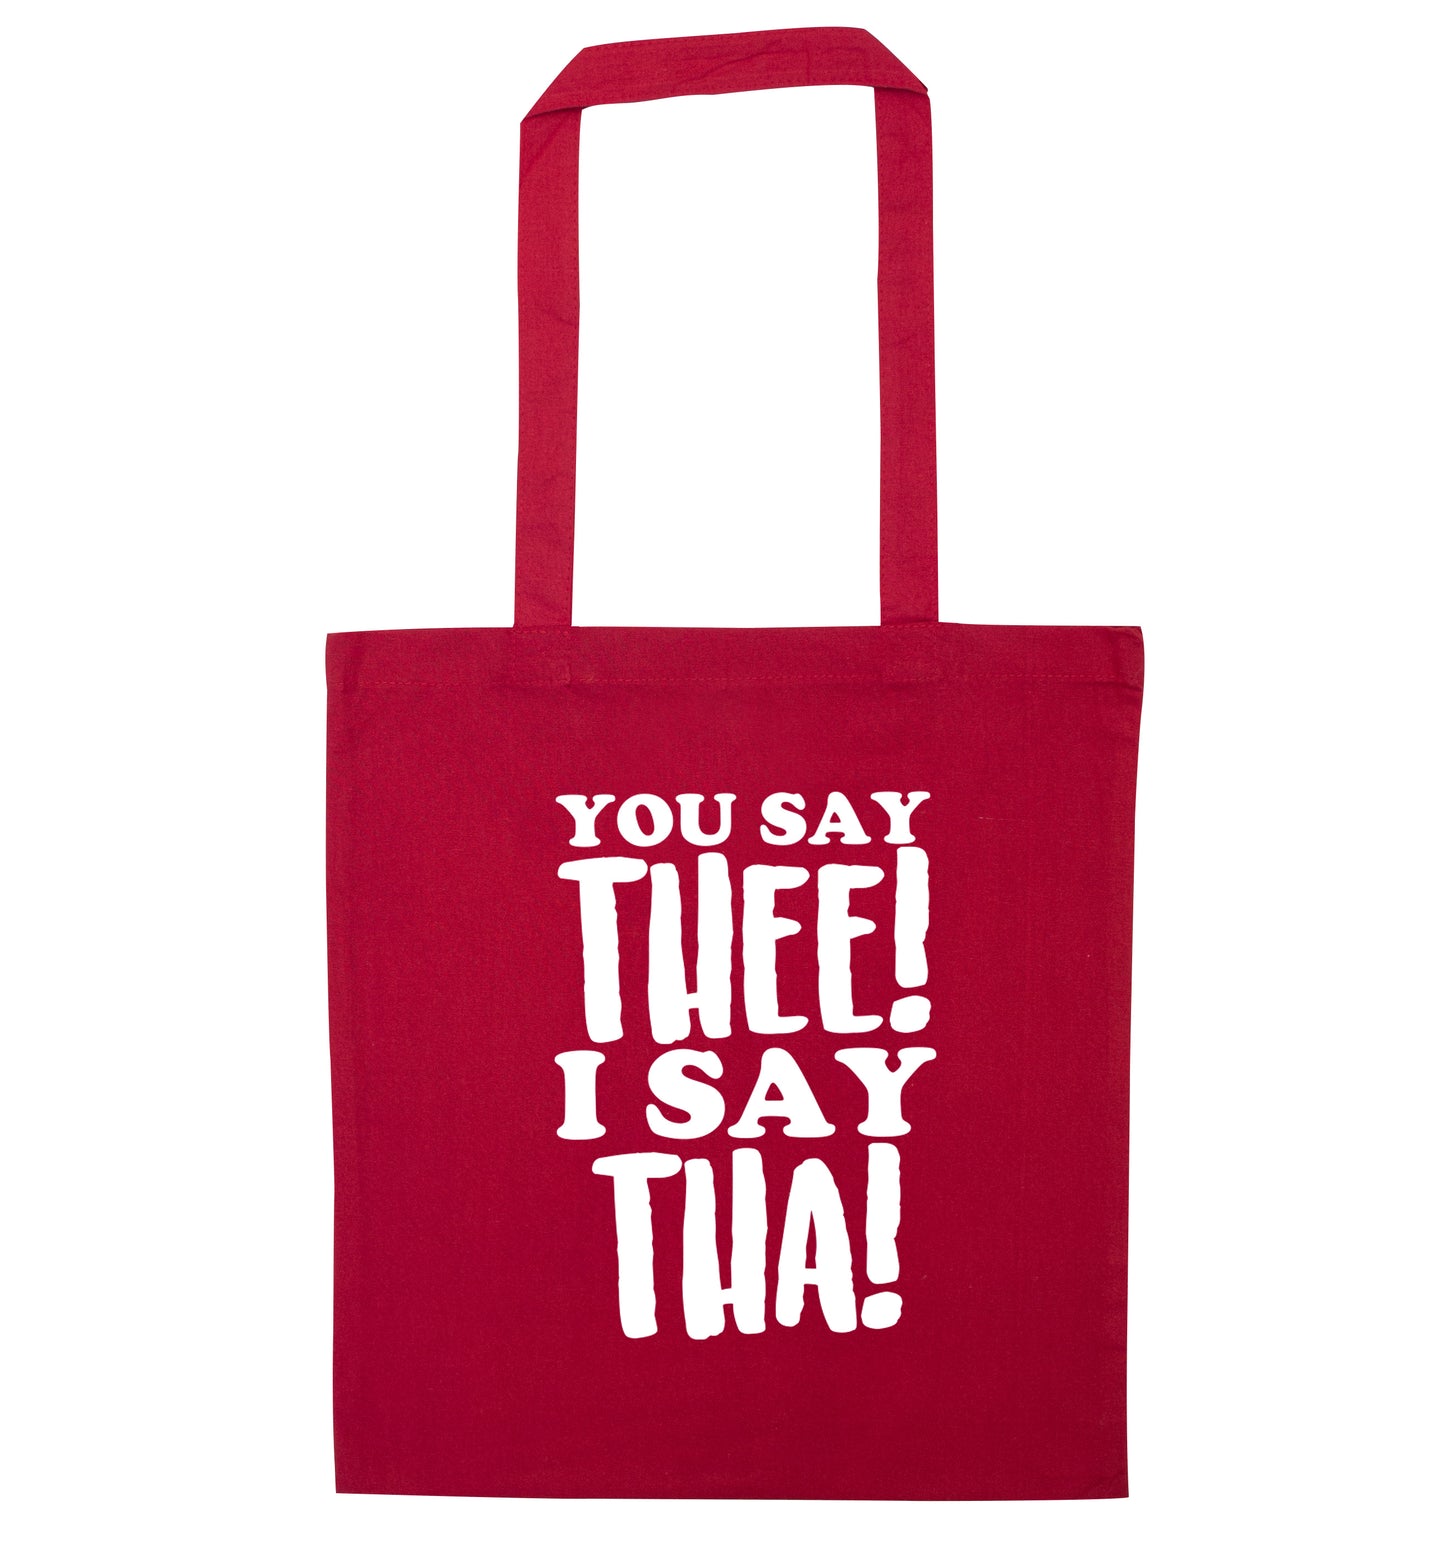 You say thee I say tha red tote bag